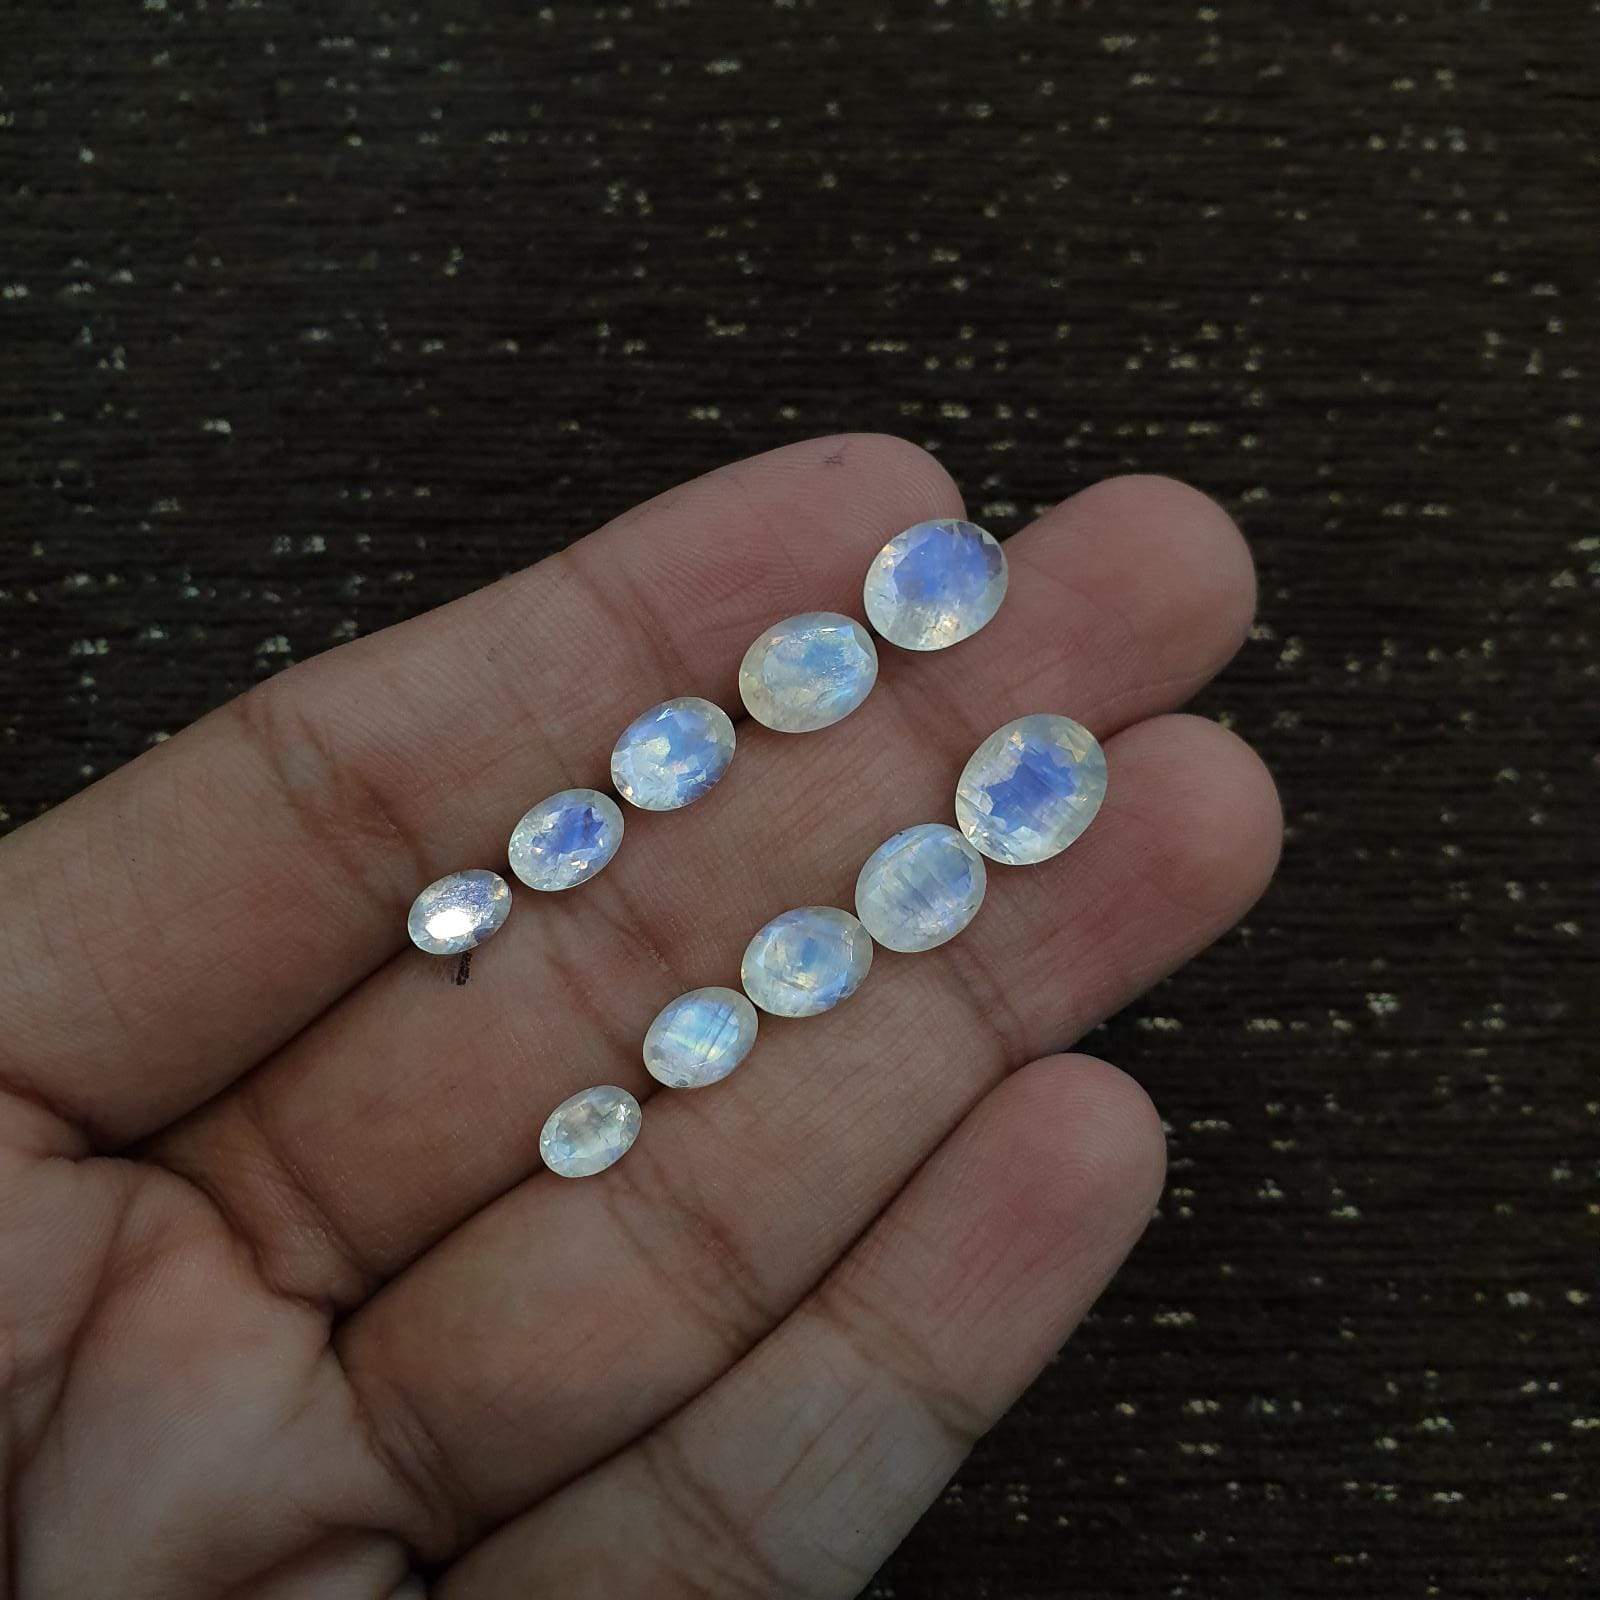 Moonstone Faceted Oval Sequence Layout 12mm-7mm 10pcs Lot - The LabradoriteKing